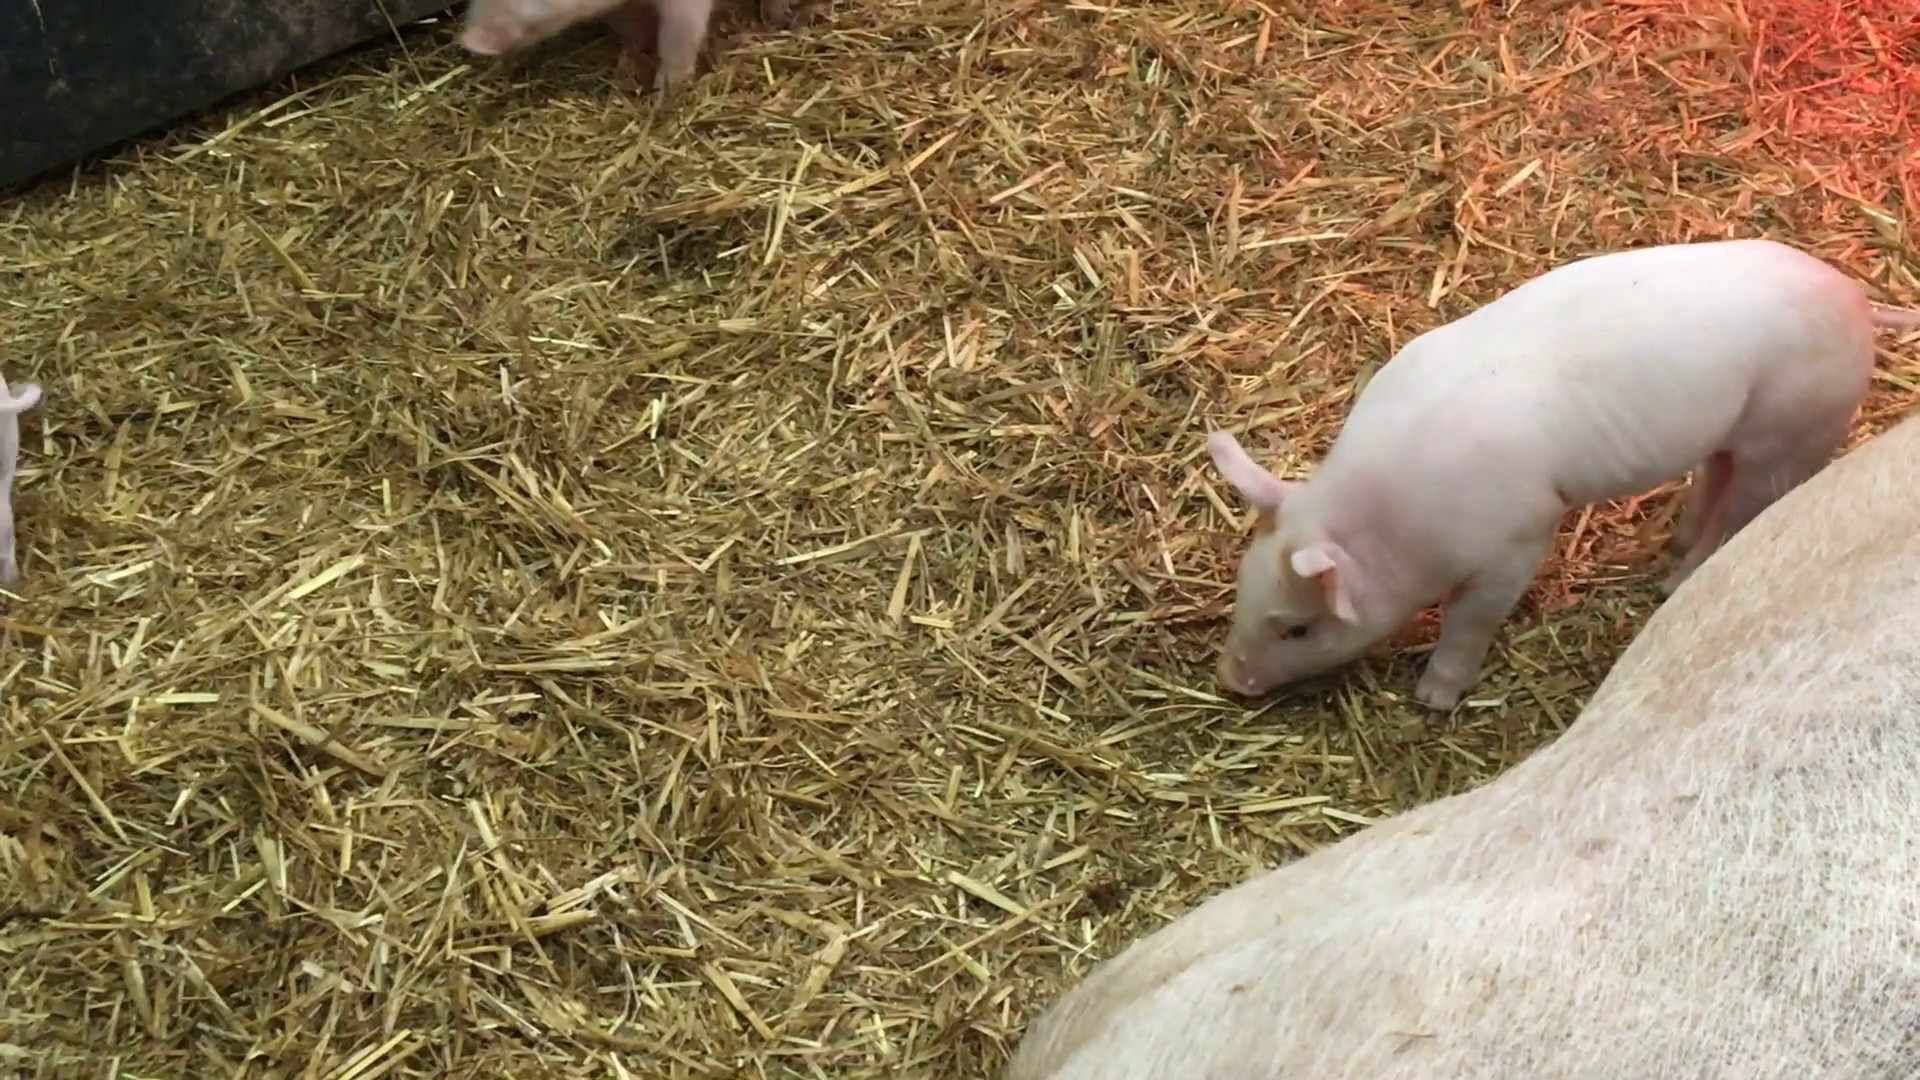 1920x1080 Mother pig lying in straw inside pigsty with little piglet trying to find  food under its mothers snout Stock Video Footage - VideoBlocks